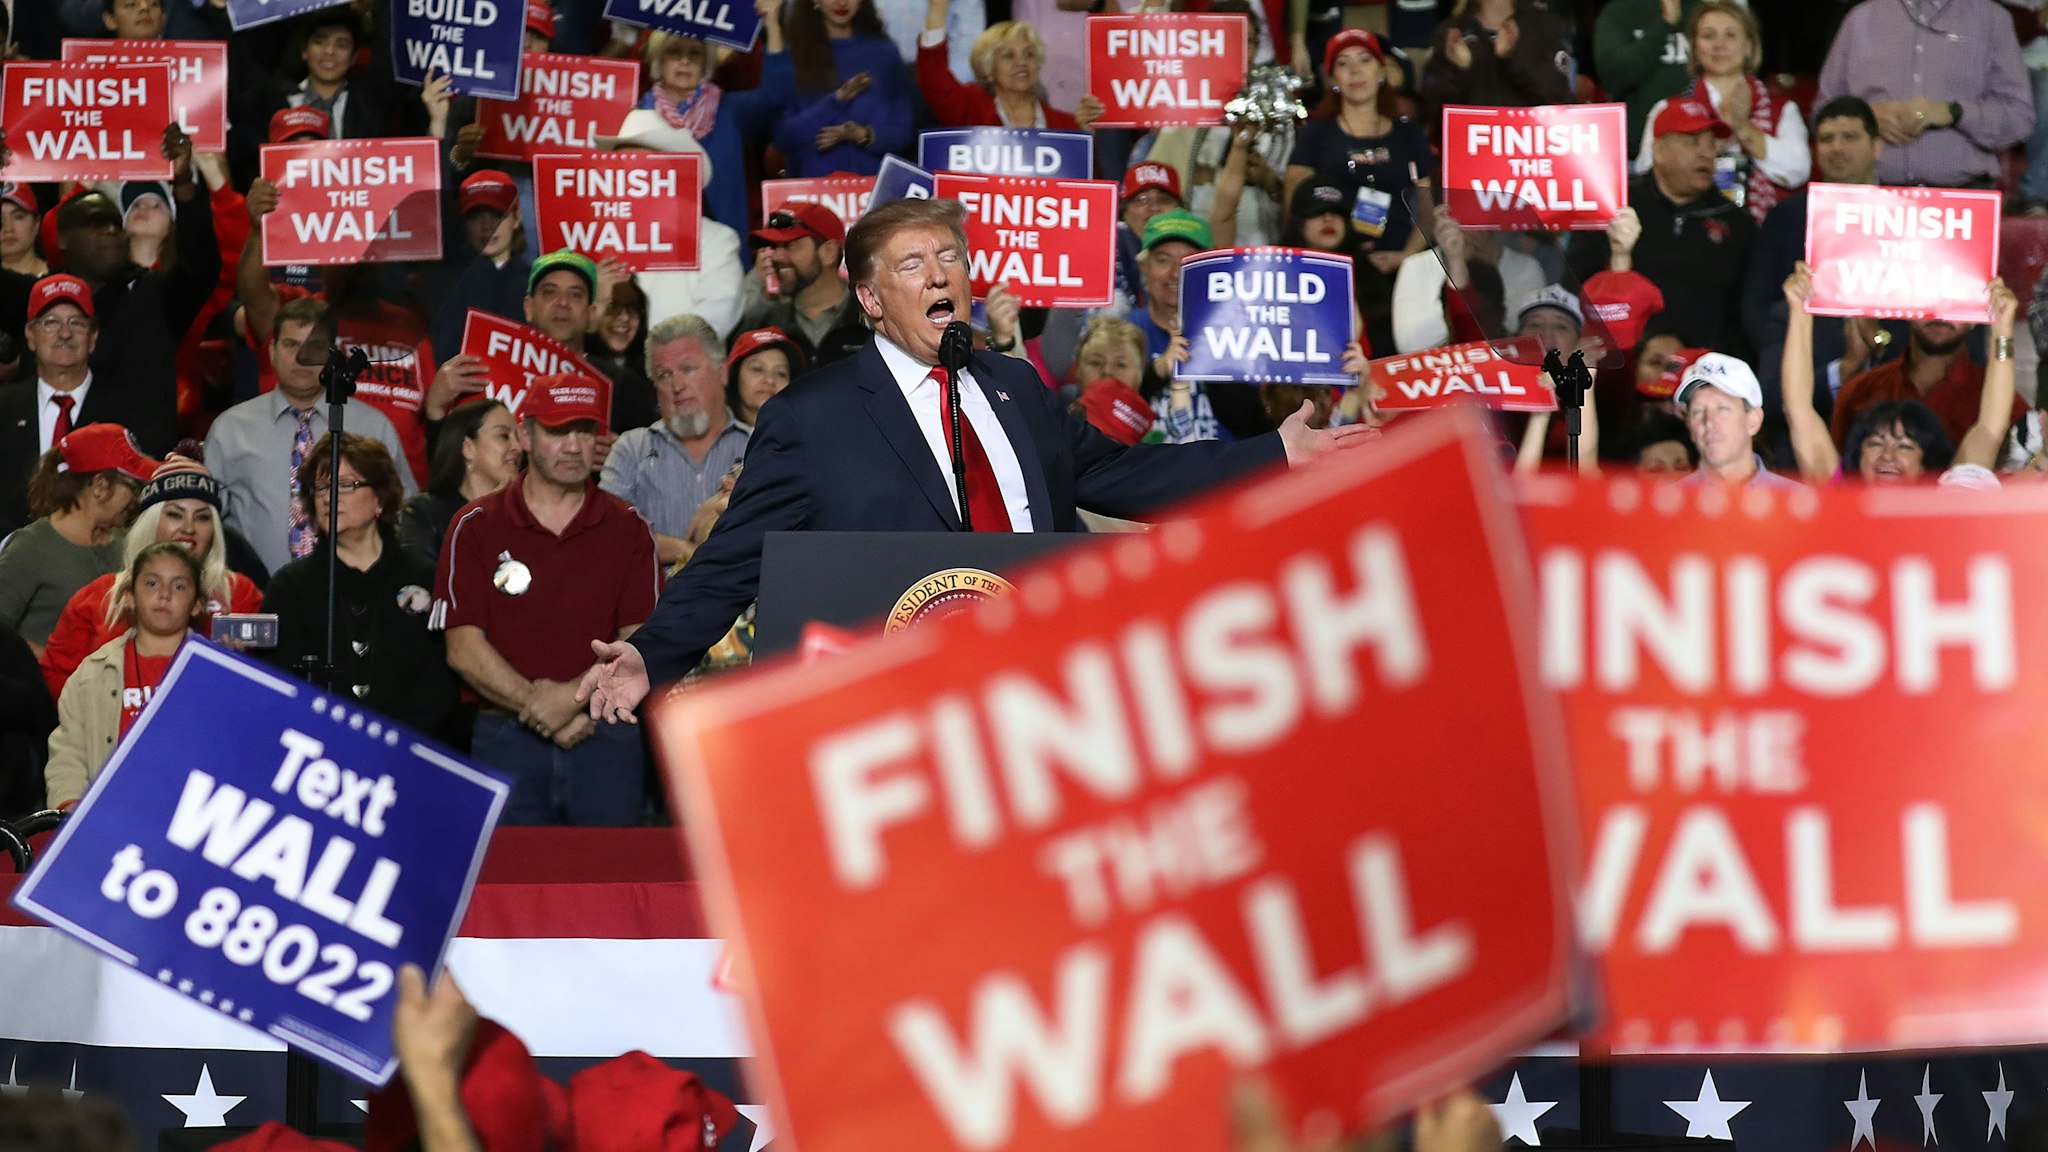 Finish The Wall Posters